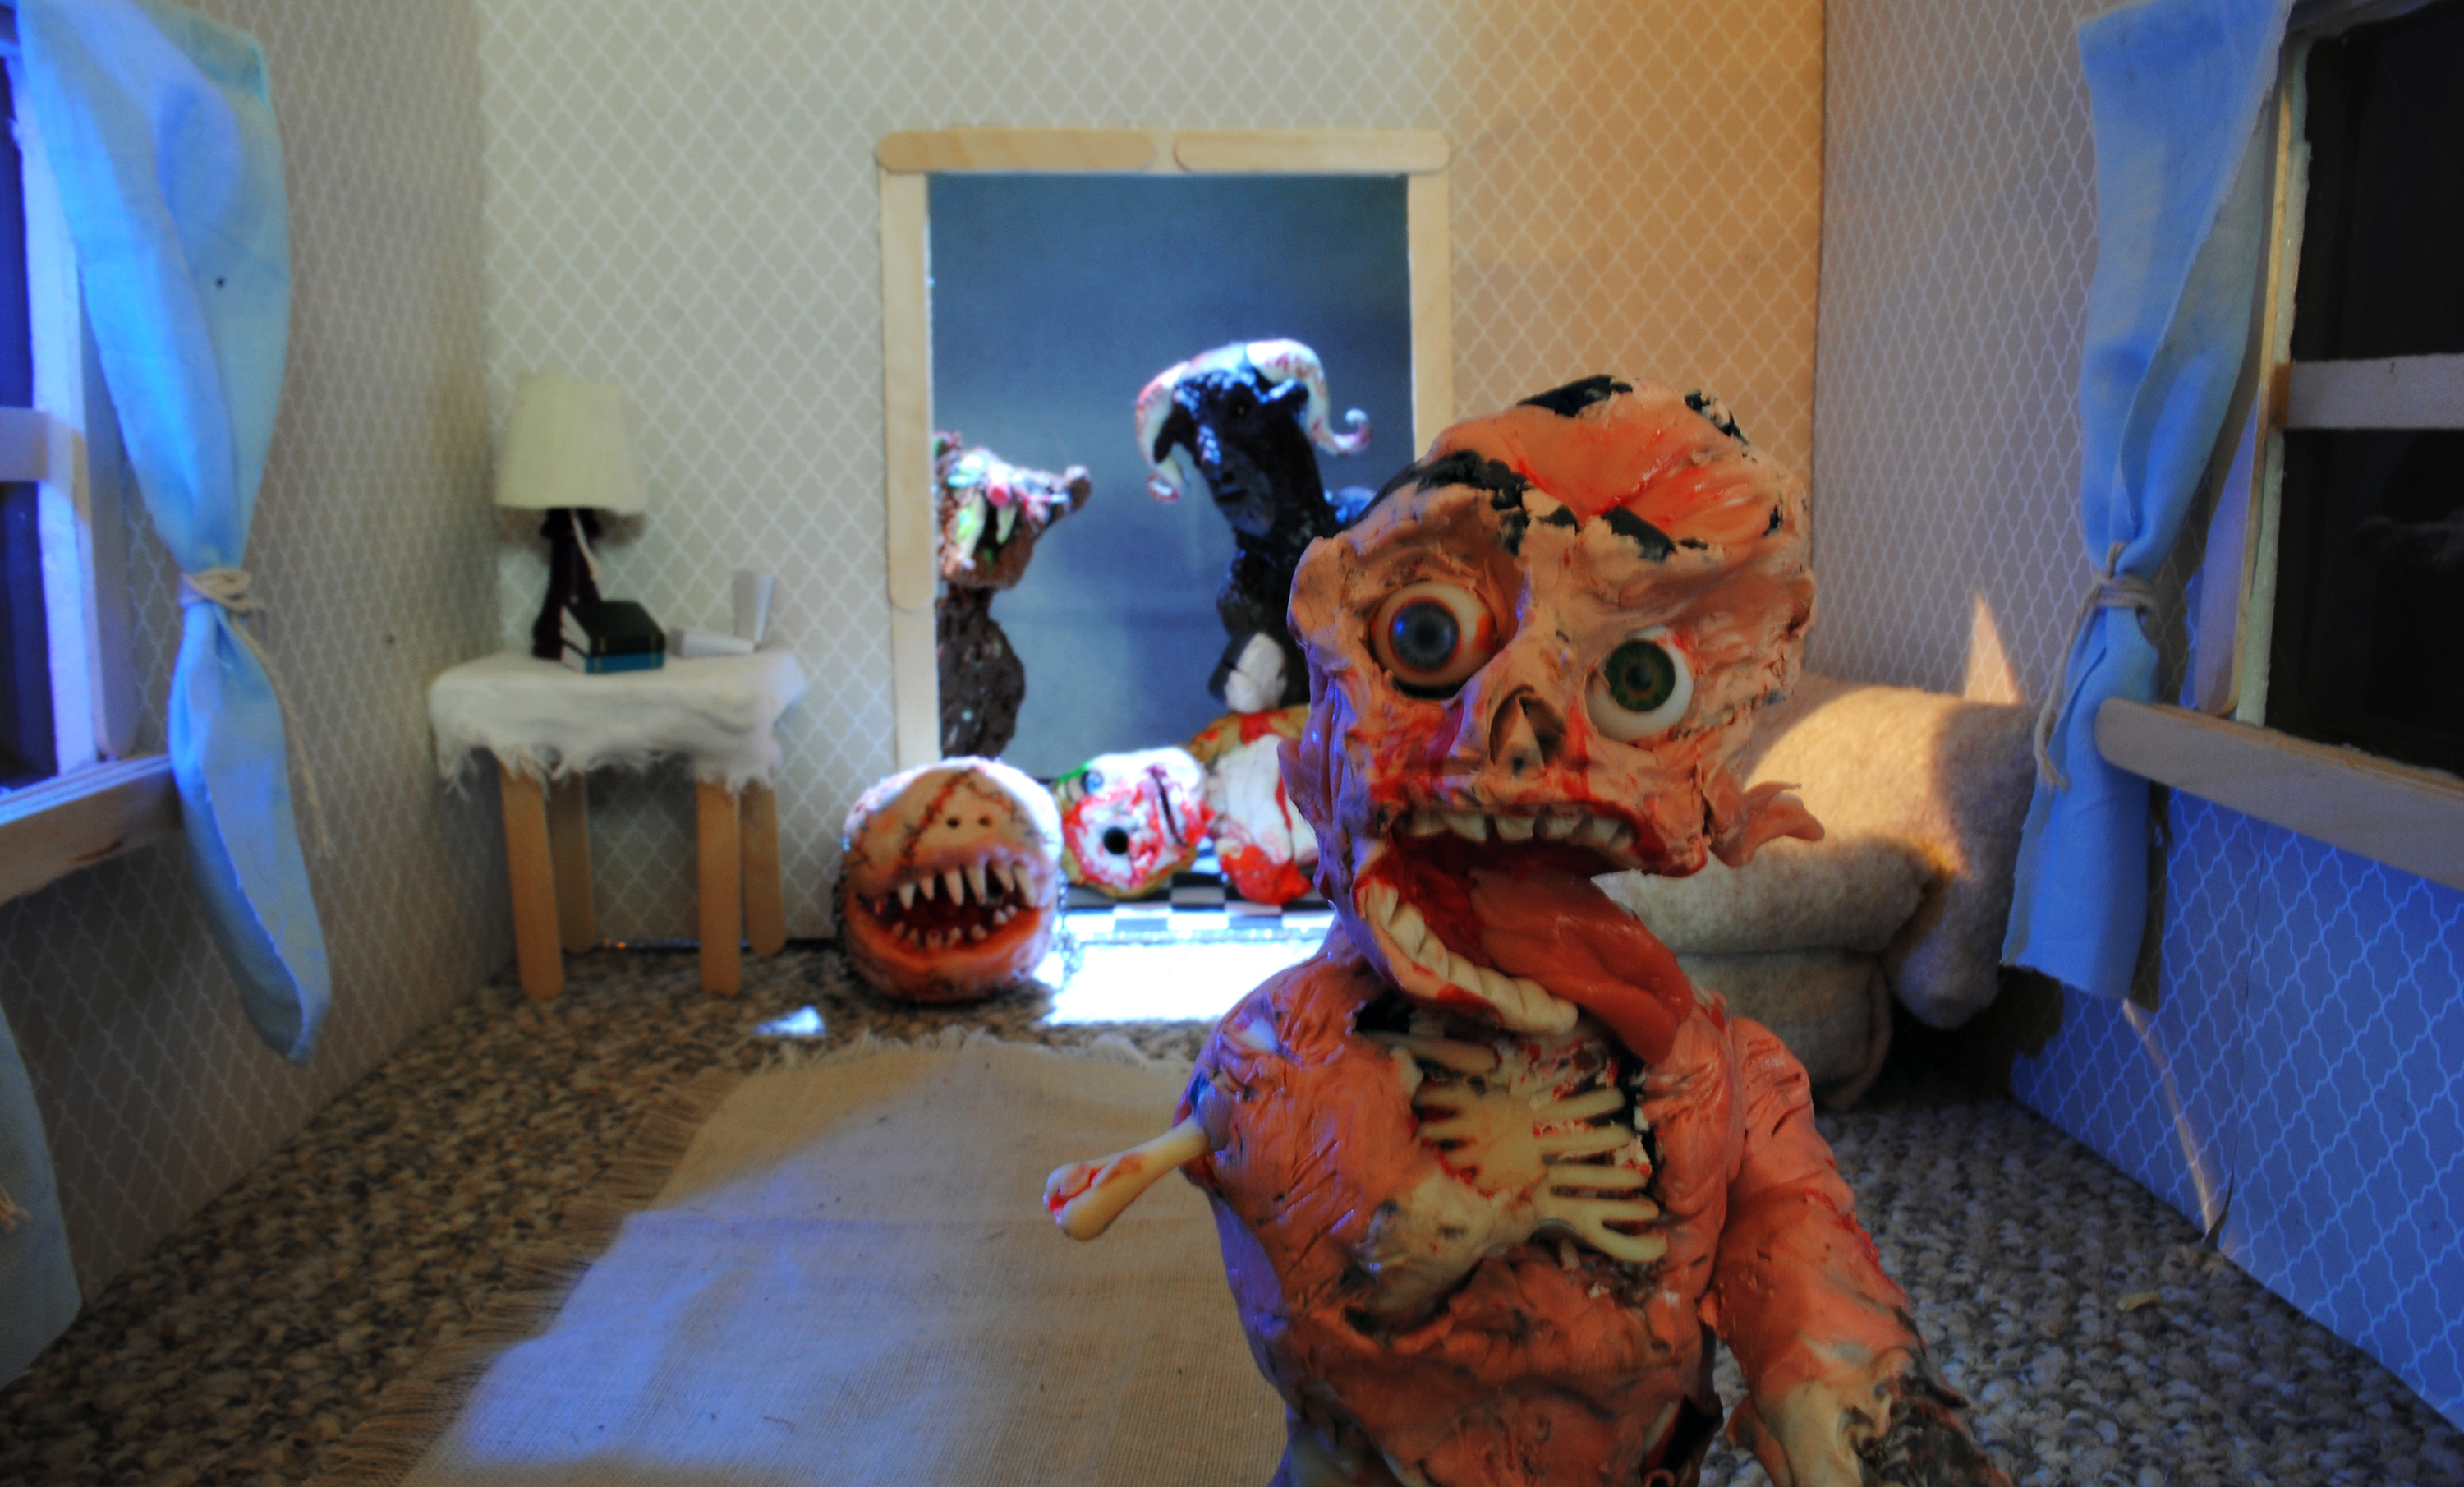 Random Cool] Monster Zombie Claymation Latest Short From Treny Shy -  Bloody Disgusting